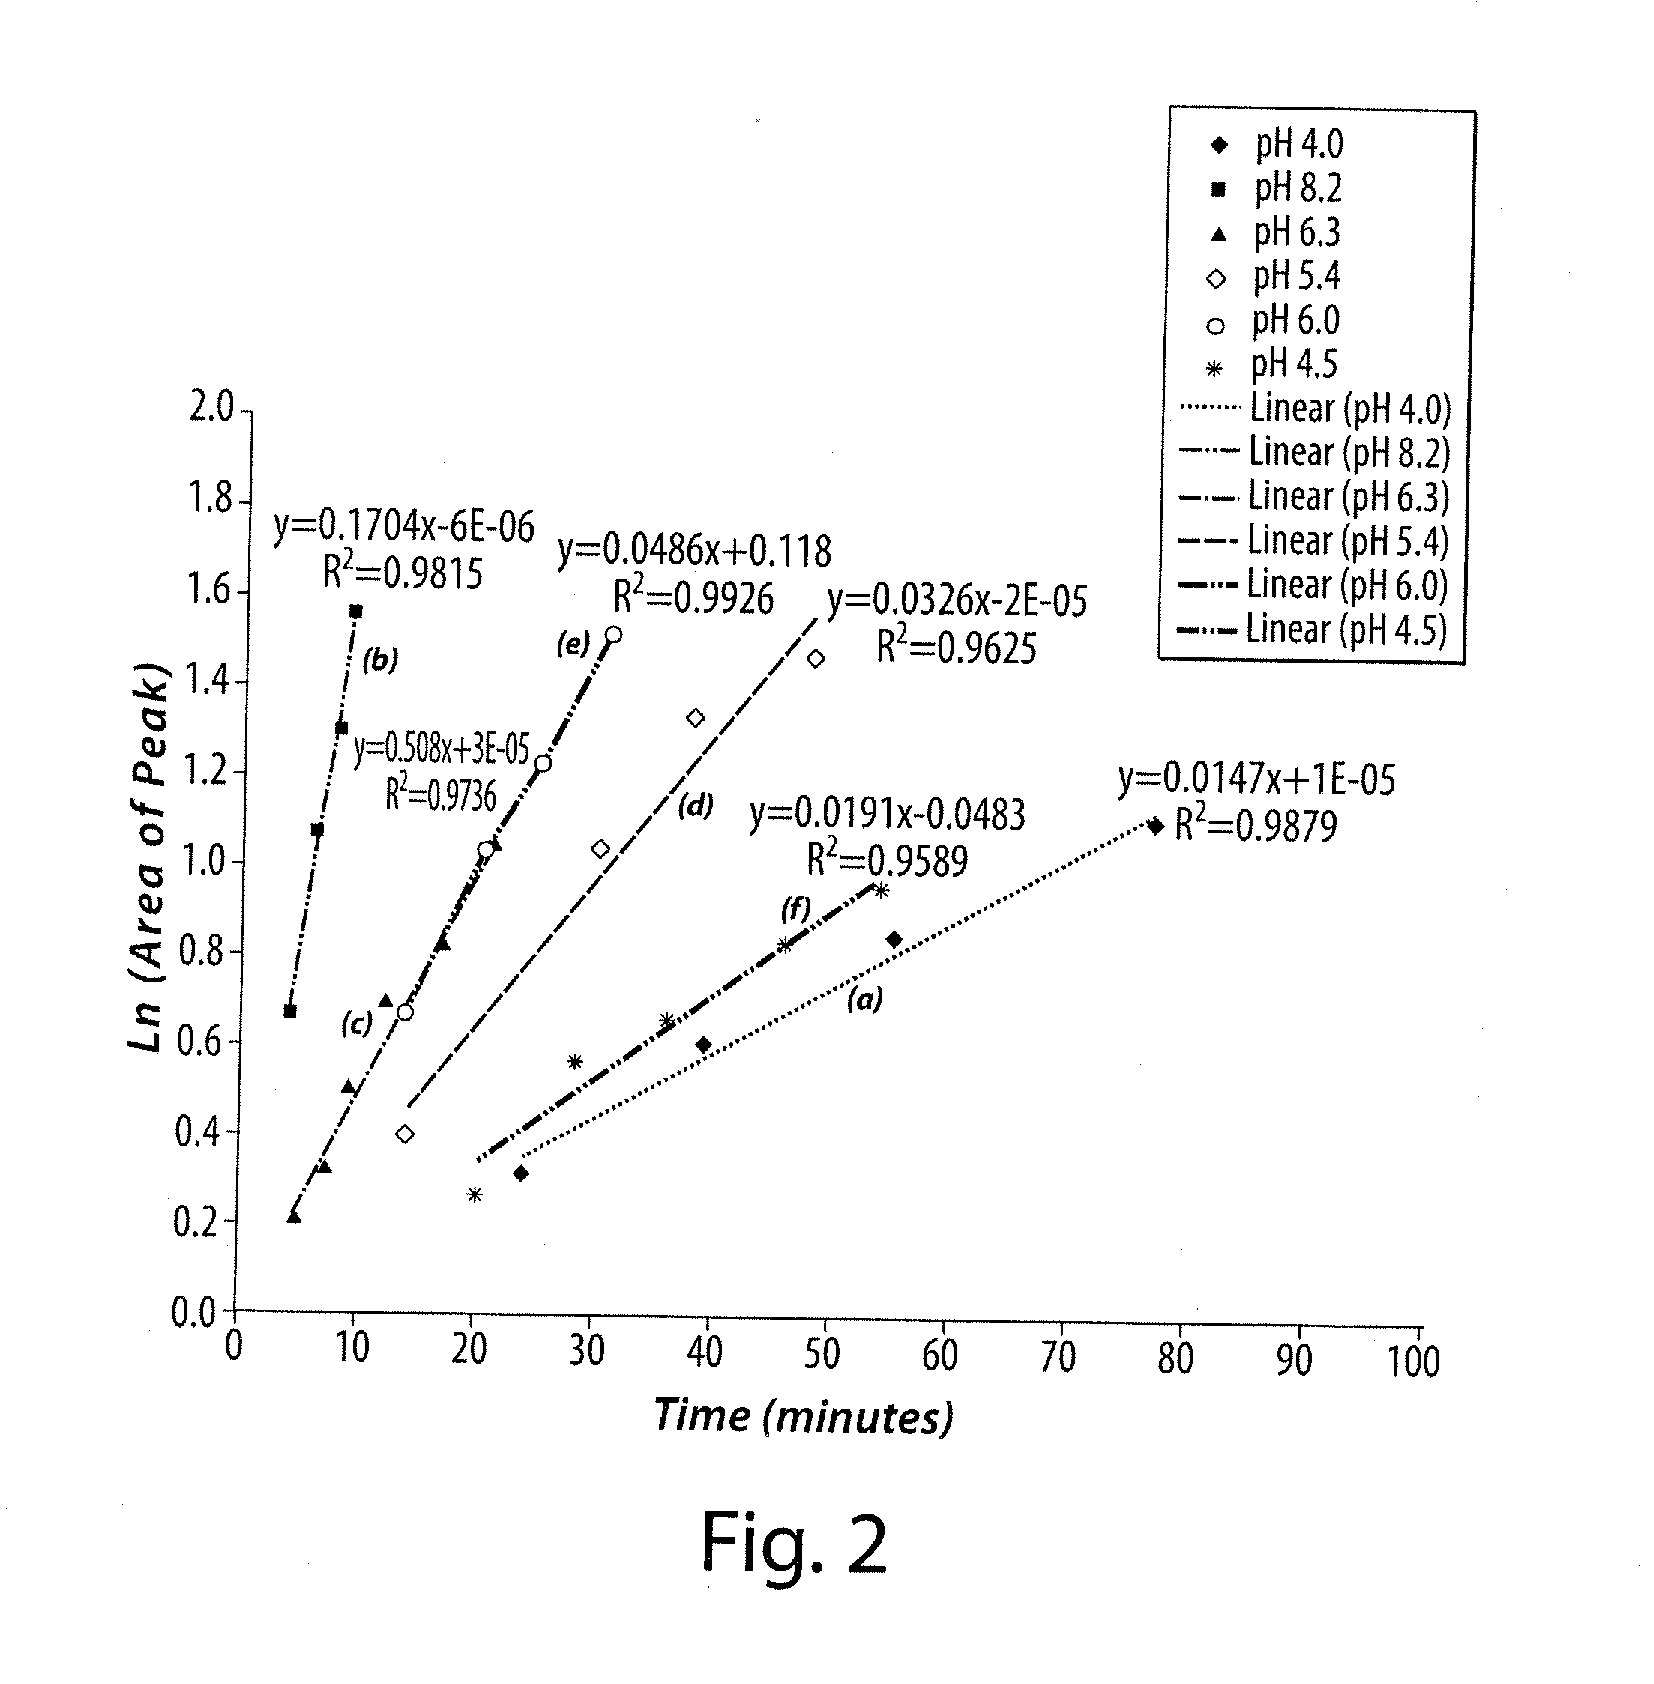 Stabilization of radiopharmaceutical compositions using ascorbic acid